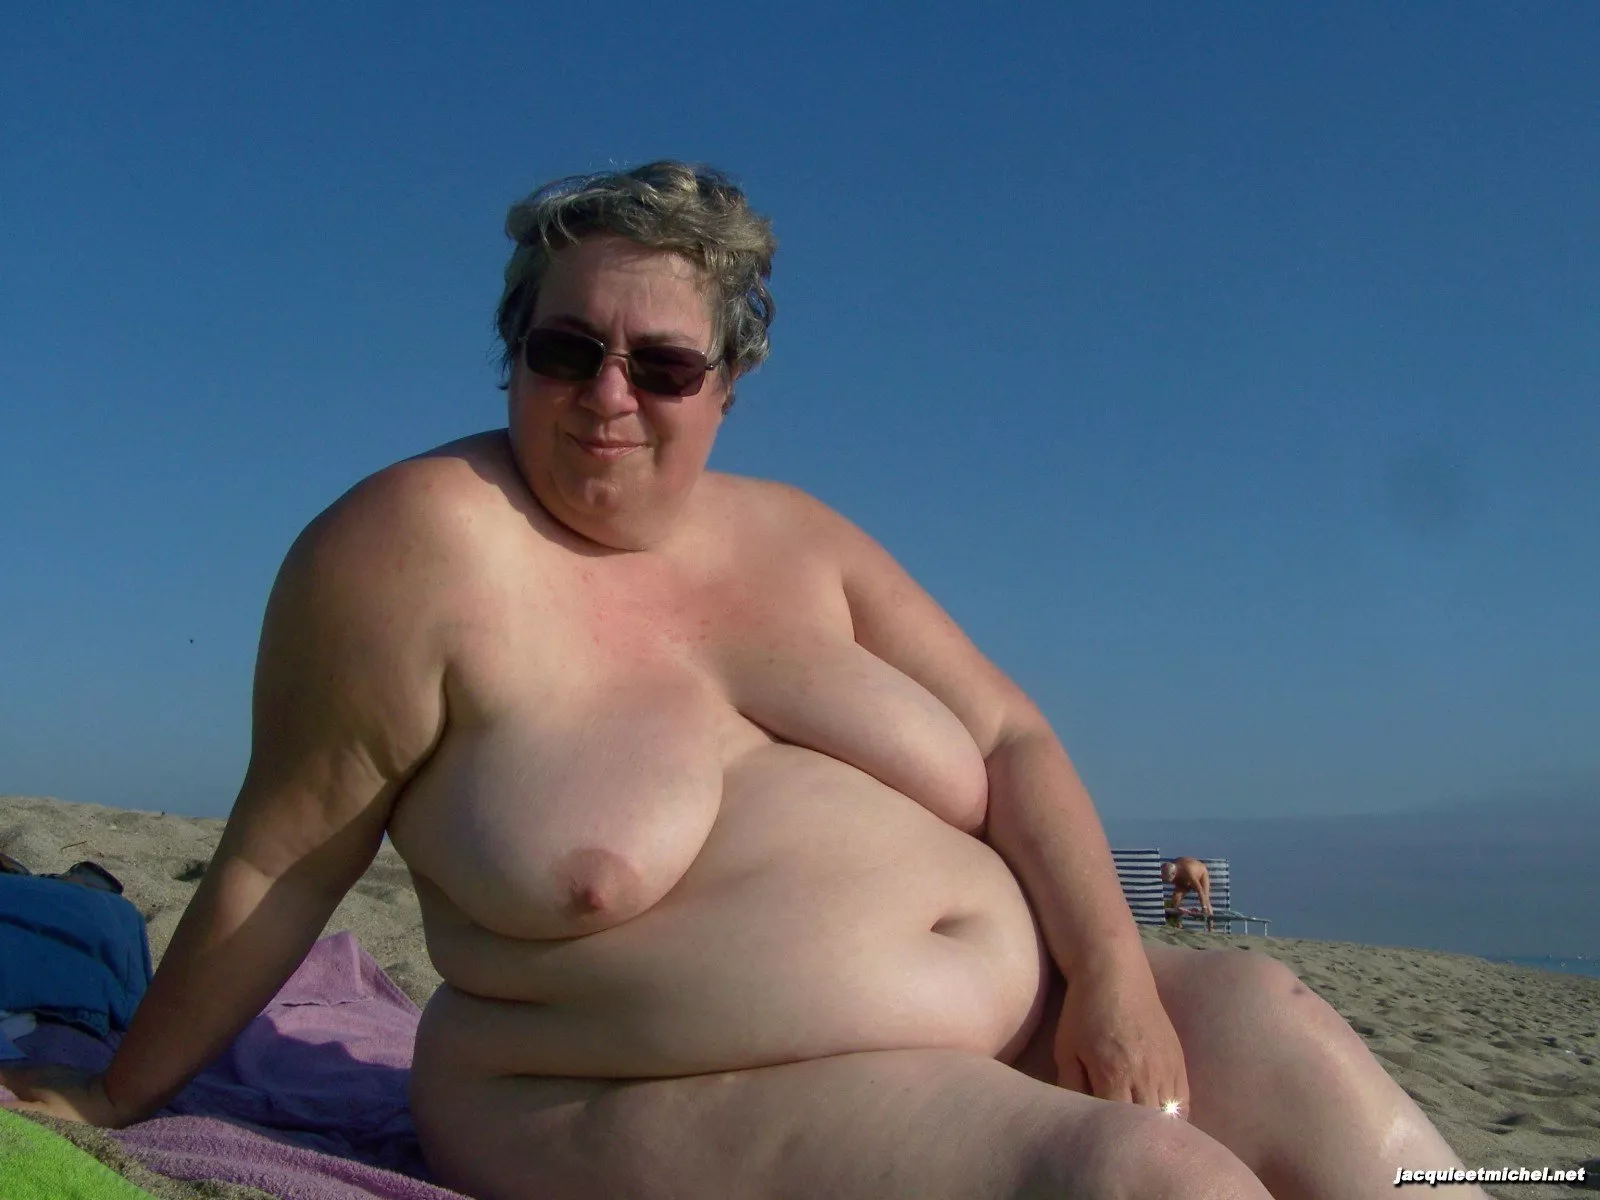 Older nudist with a big belly sitting on the beach nudes : BBWnudists | NUDE -PICS.ORG